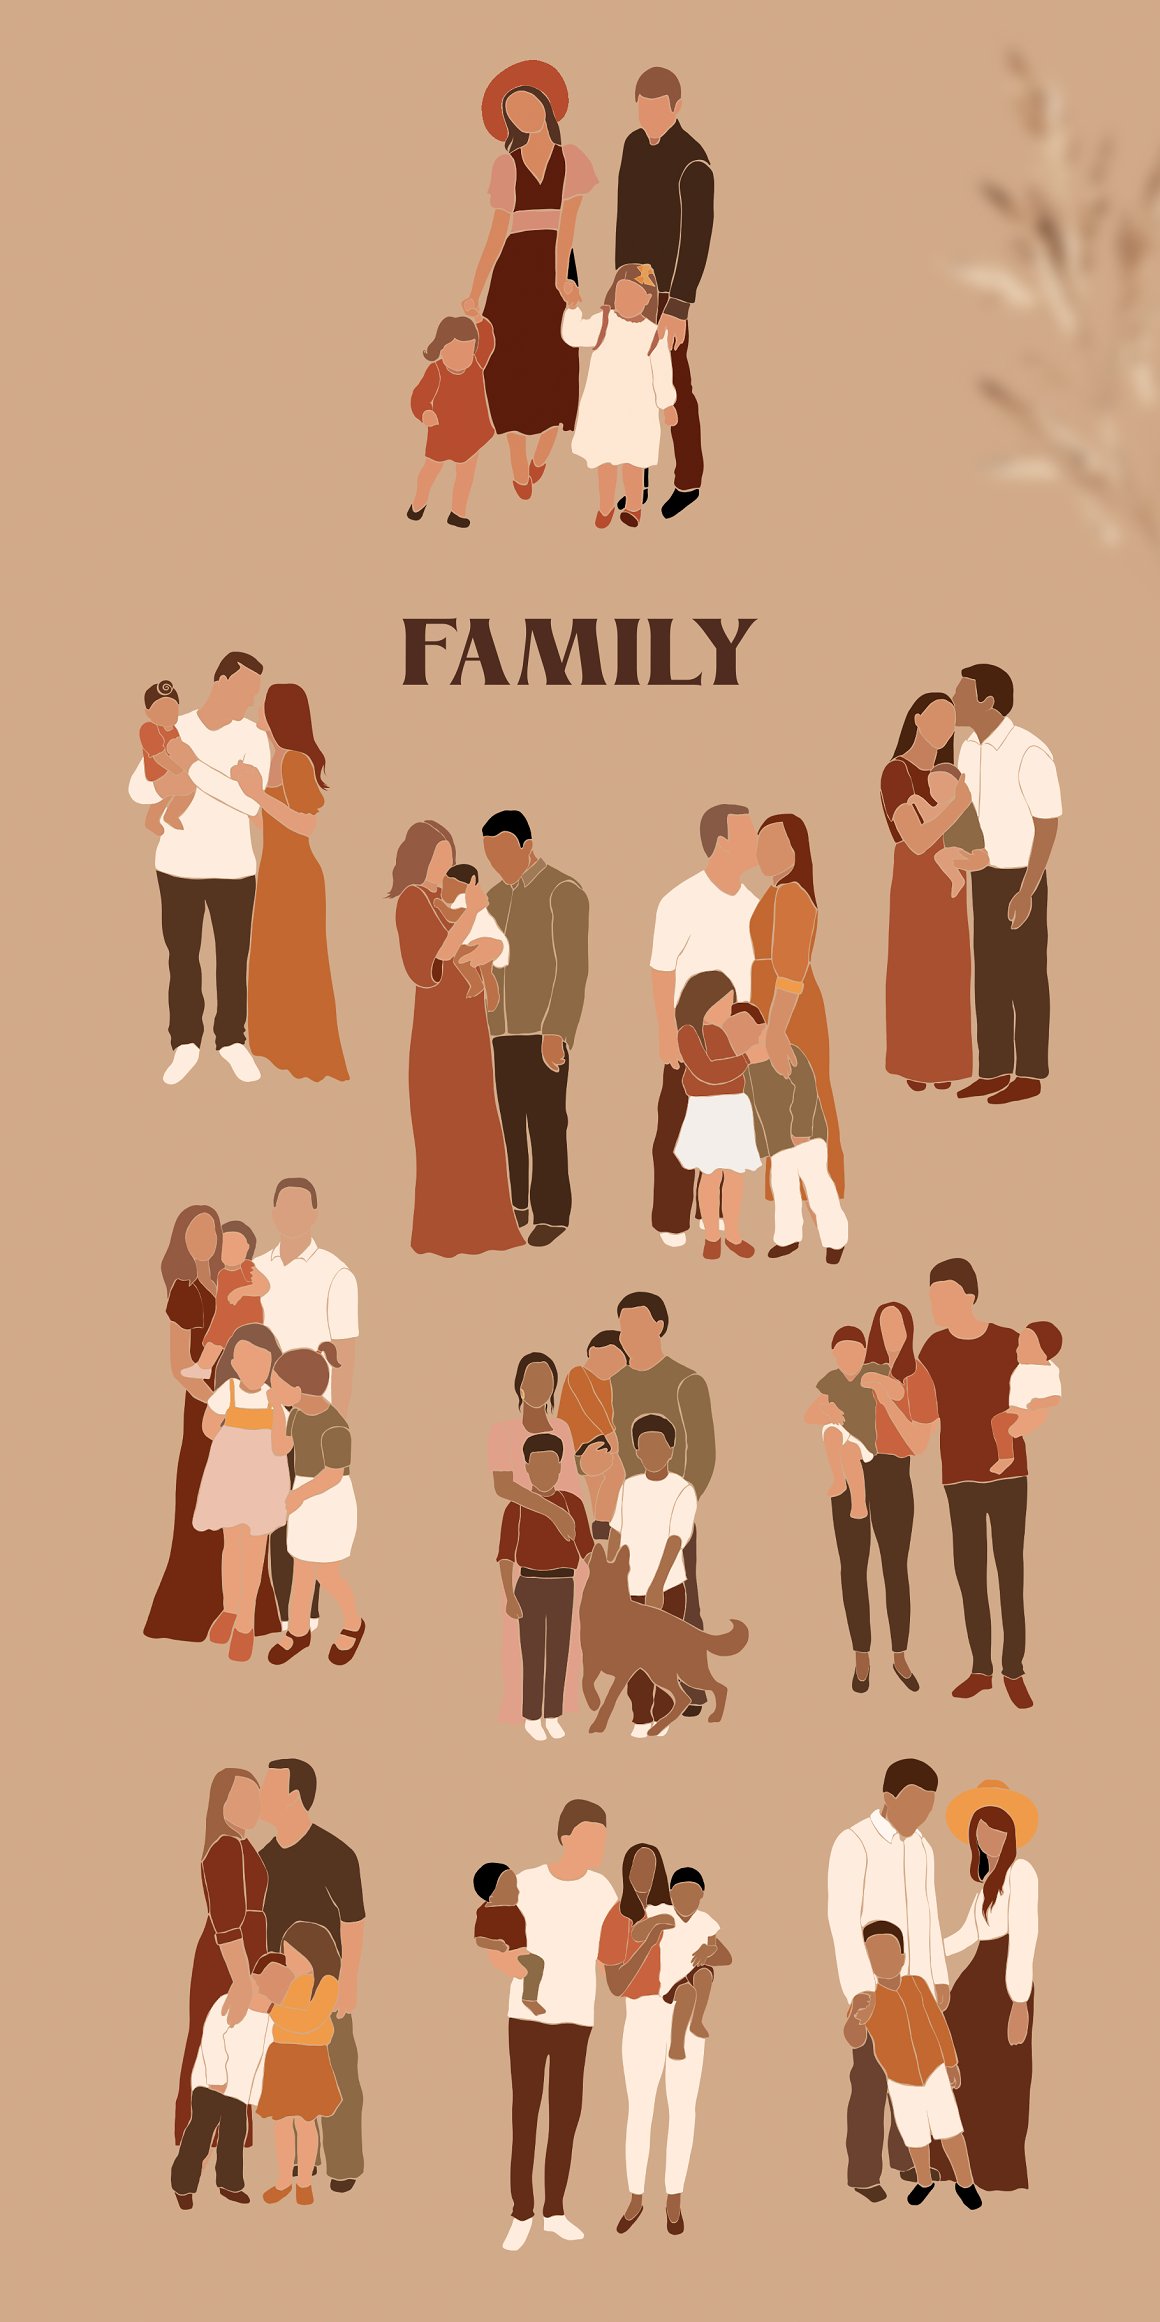 11 family illustrations in warm colors.